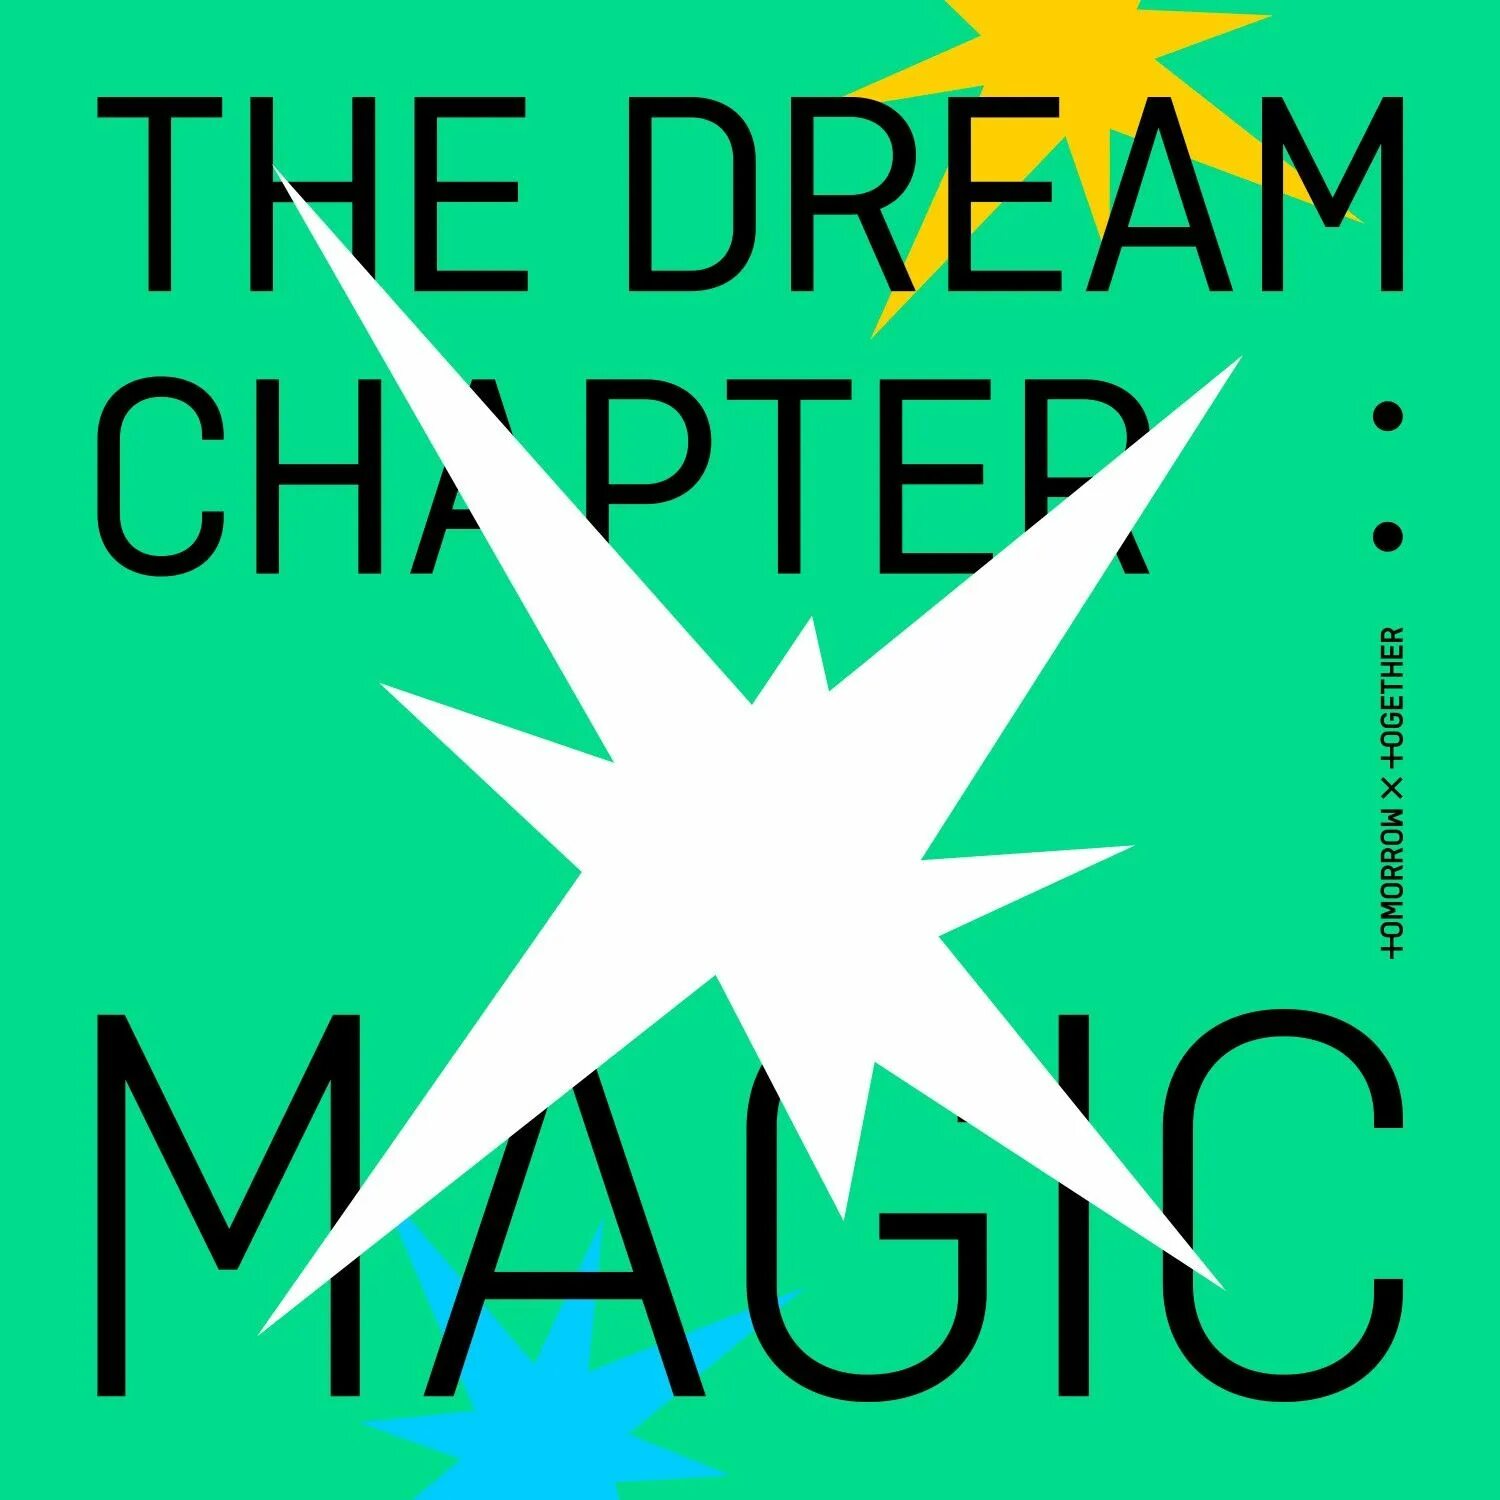 The Dream Chapter: Magic альбом. The Dream Chapter: Magic tomorrow x together. Txt обложка альбома. Runaway txt обложка. Музыка txt